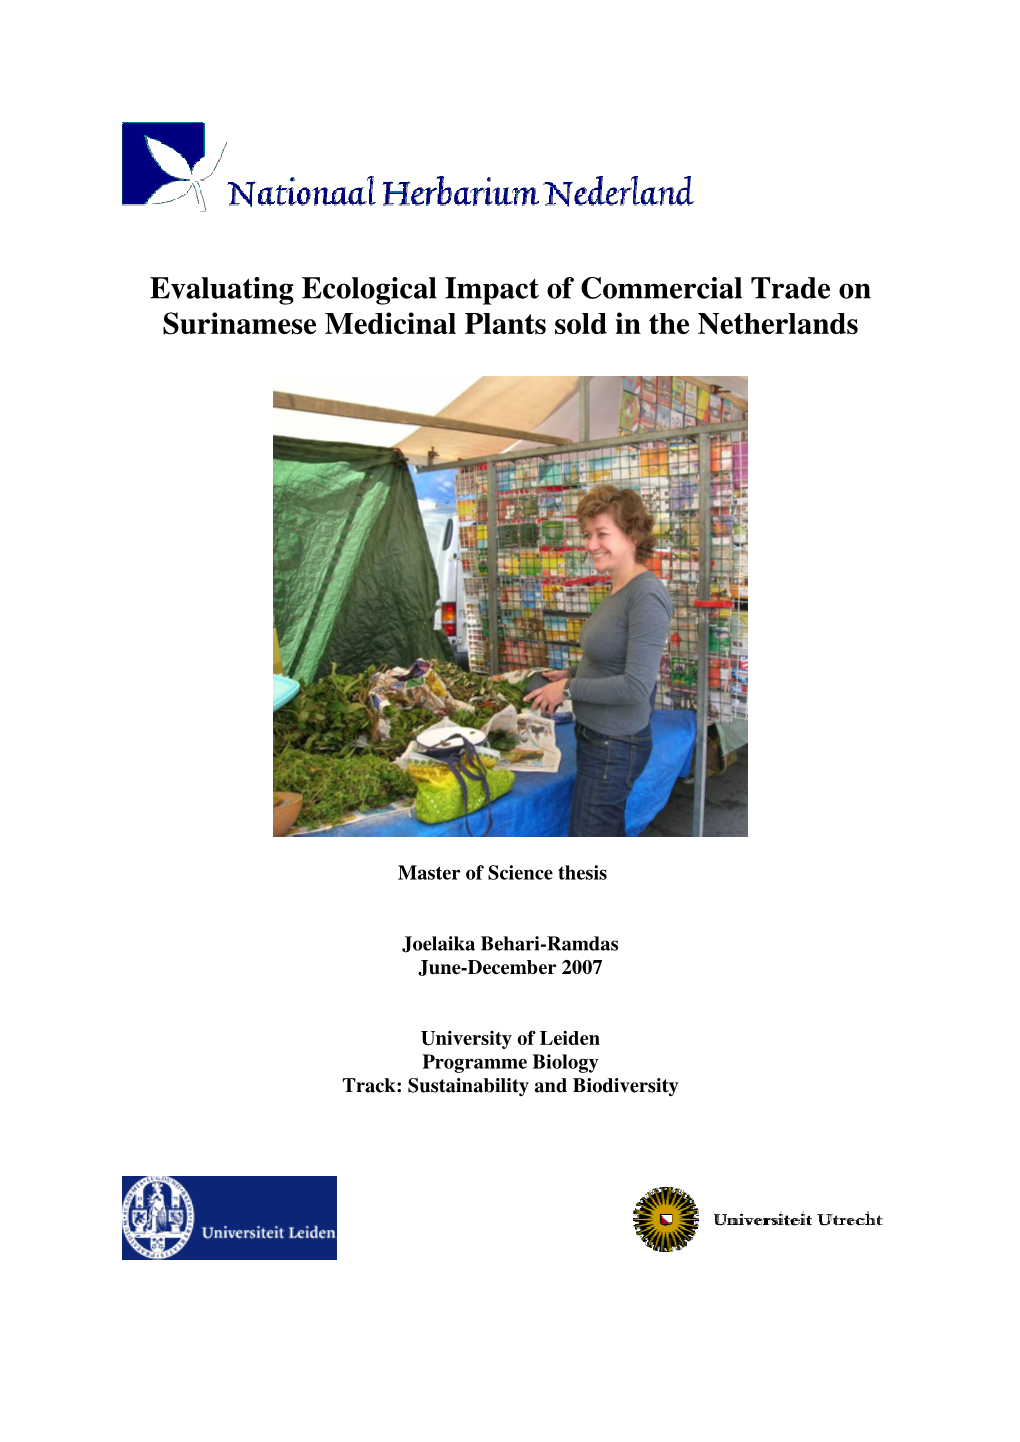 Evaluating Ecological Impact of Commercial Trade on Surinamese Medicinal Plants Sold in the Netherlands